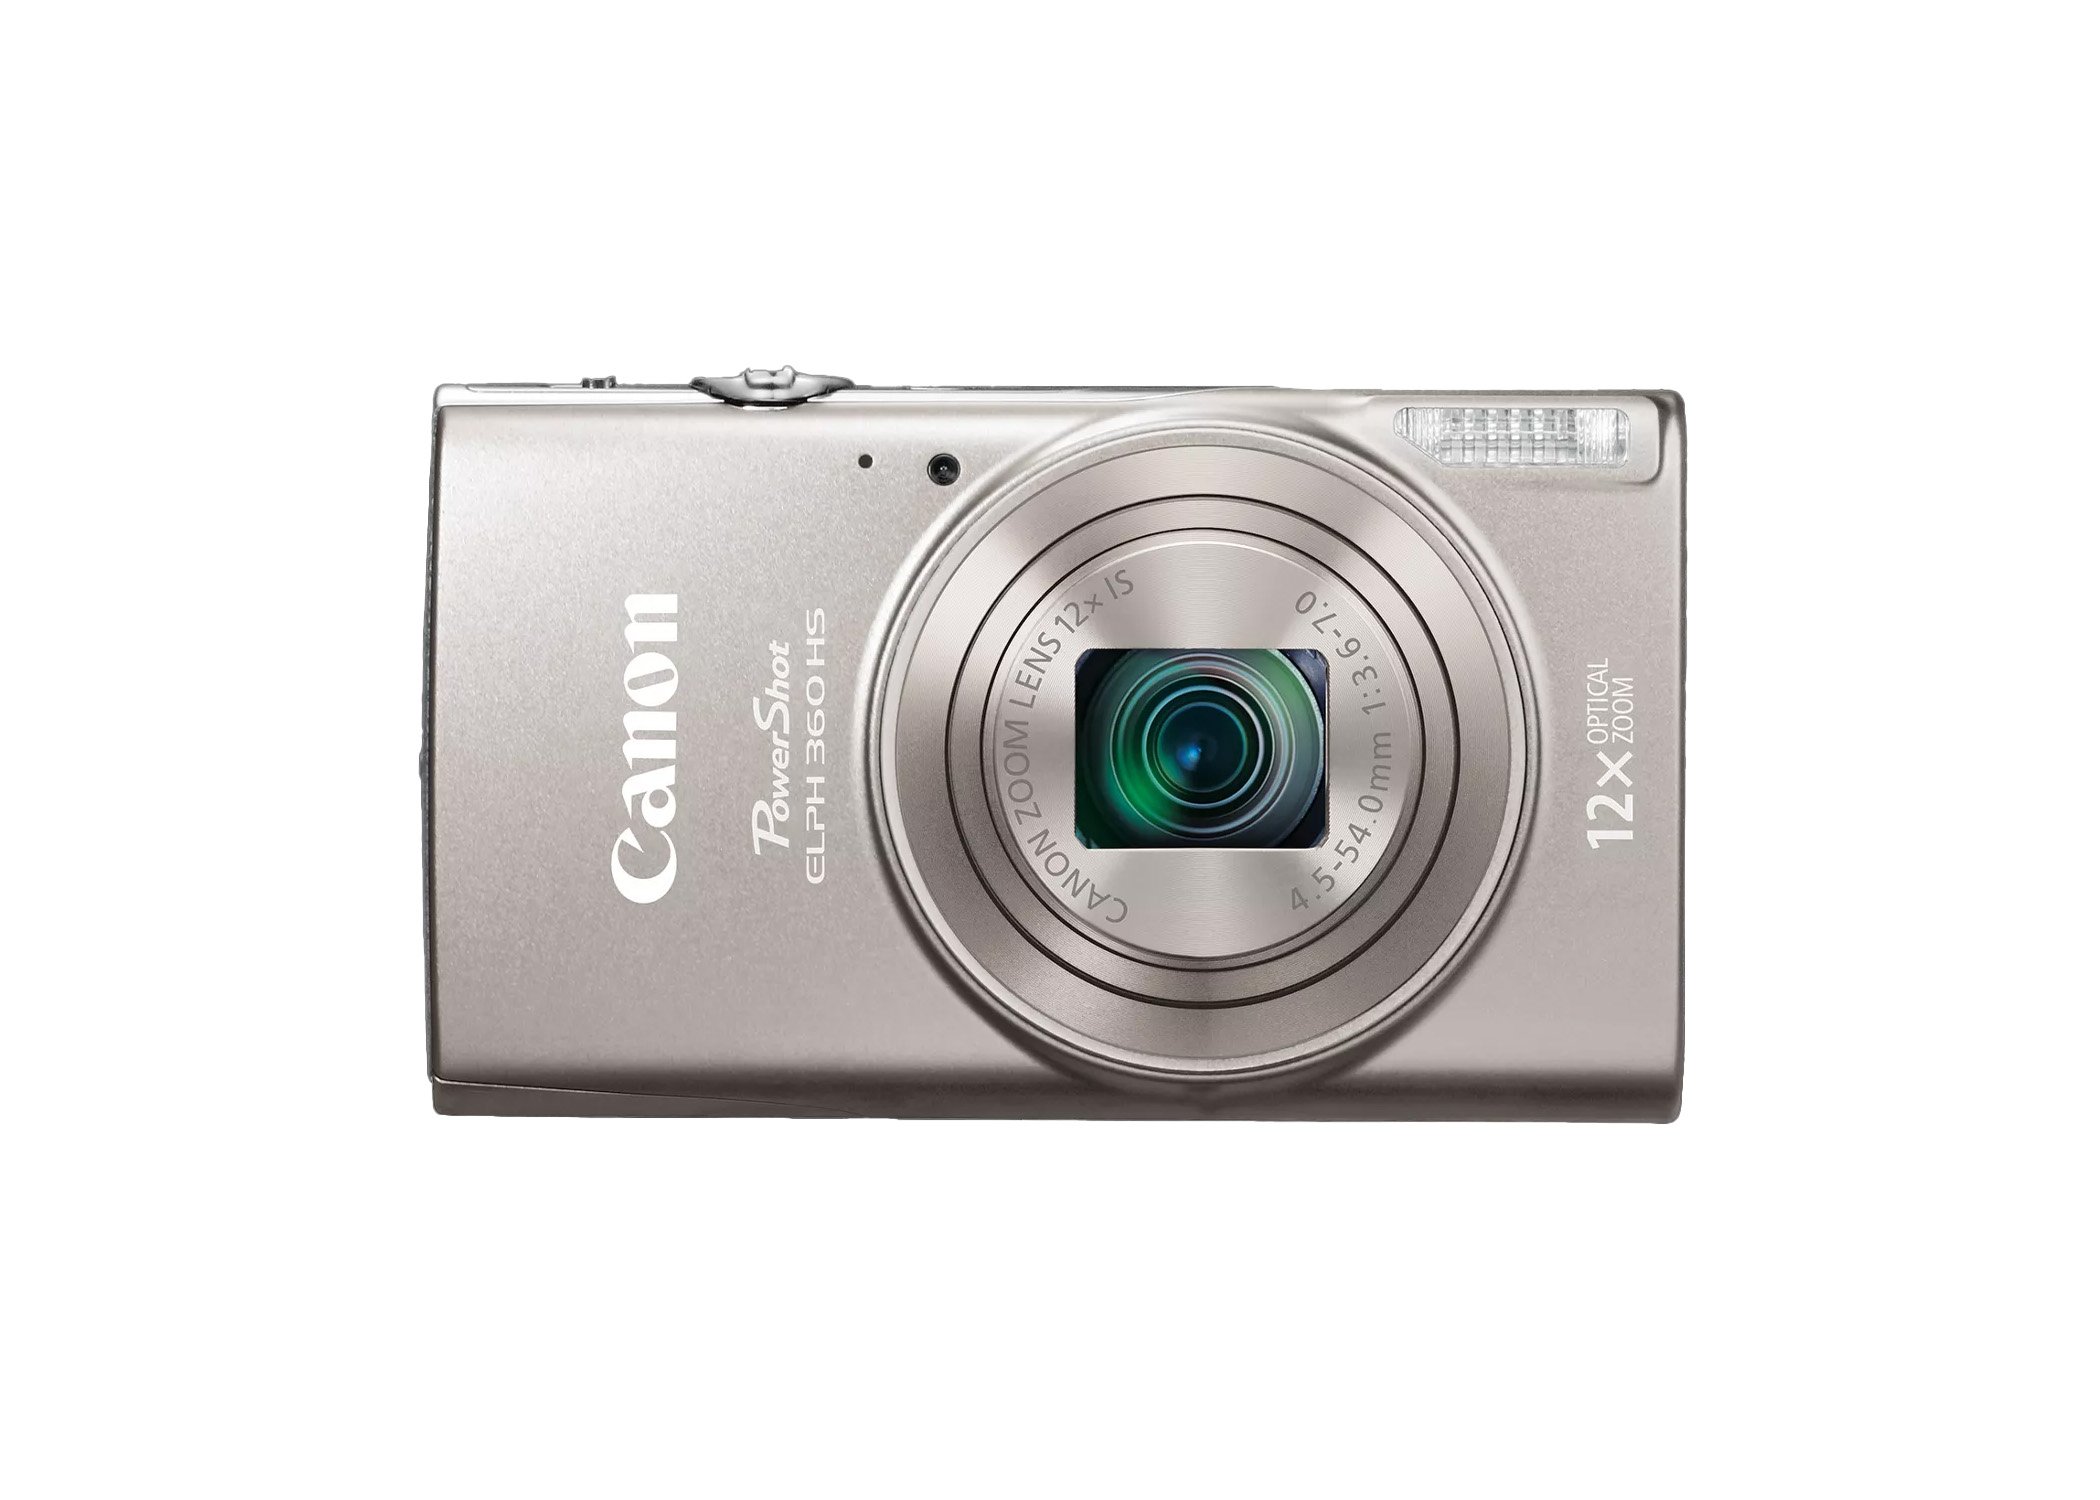 Canon PowerShot ELPH 360 HS 20.2MP Digital Camera with 12x Optical Zoom